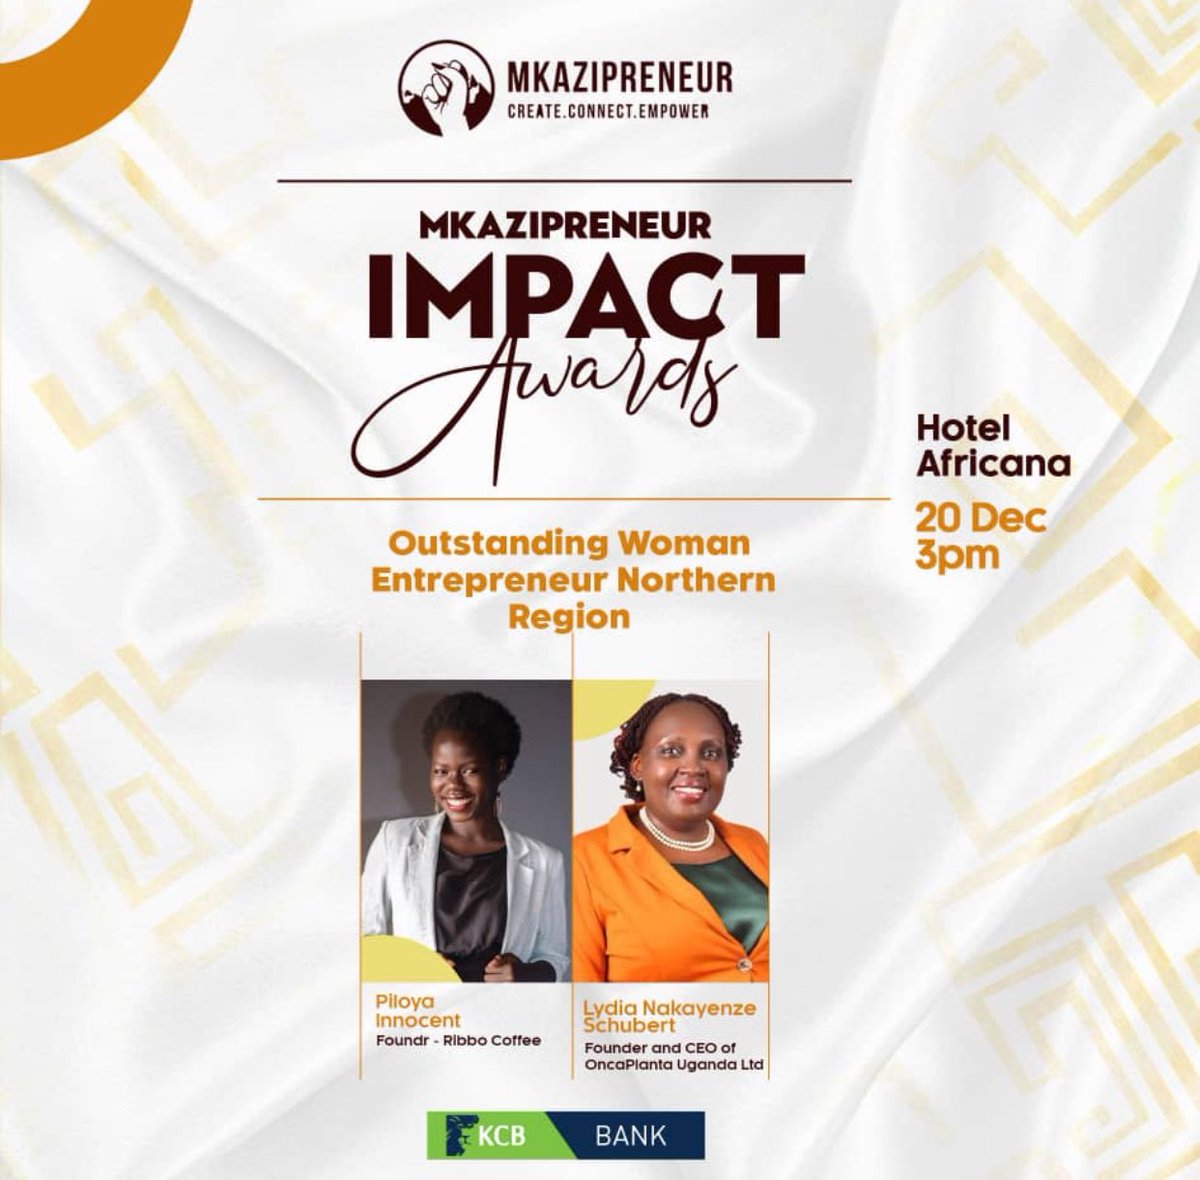 We see you and celebrate you @ipiloya of @ribbocoffee and @LydiaNakayenze of @moomegen 

Thank you for the outstanding work you do in the northern region!

#mkaziawards2023 

@kcbbankug